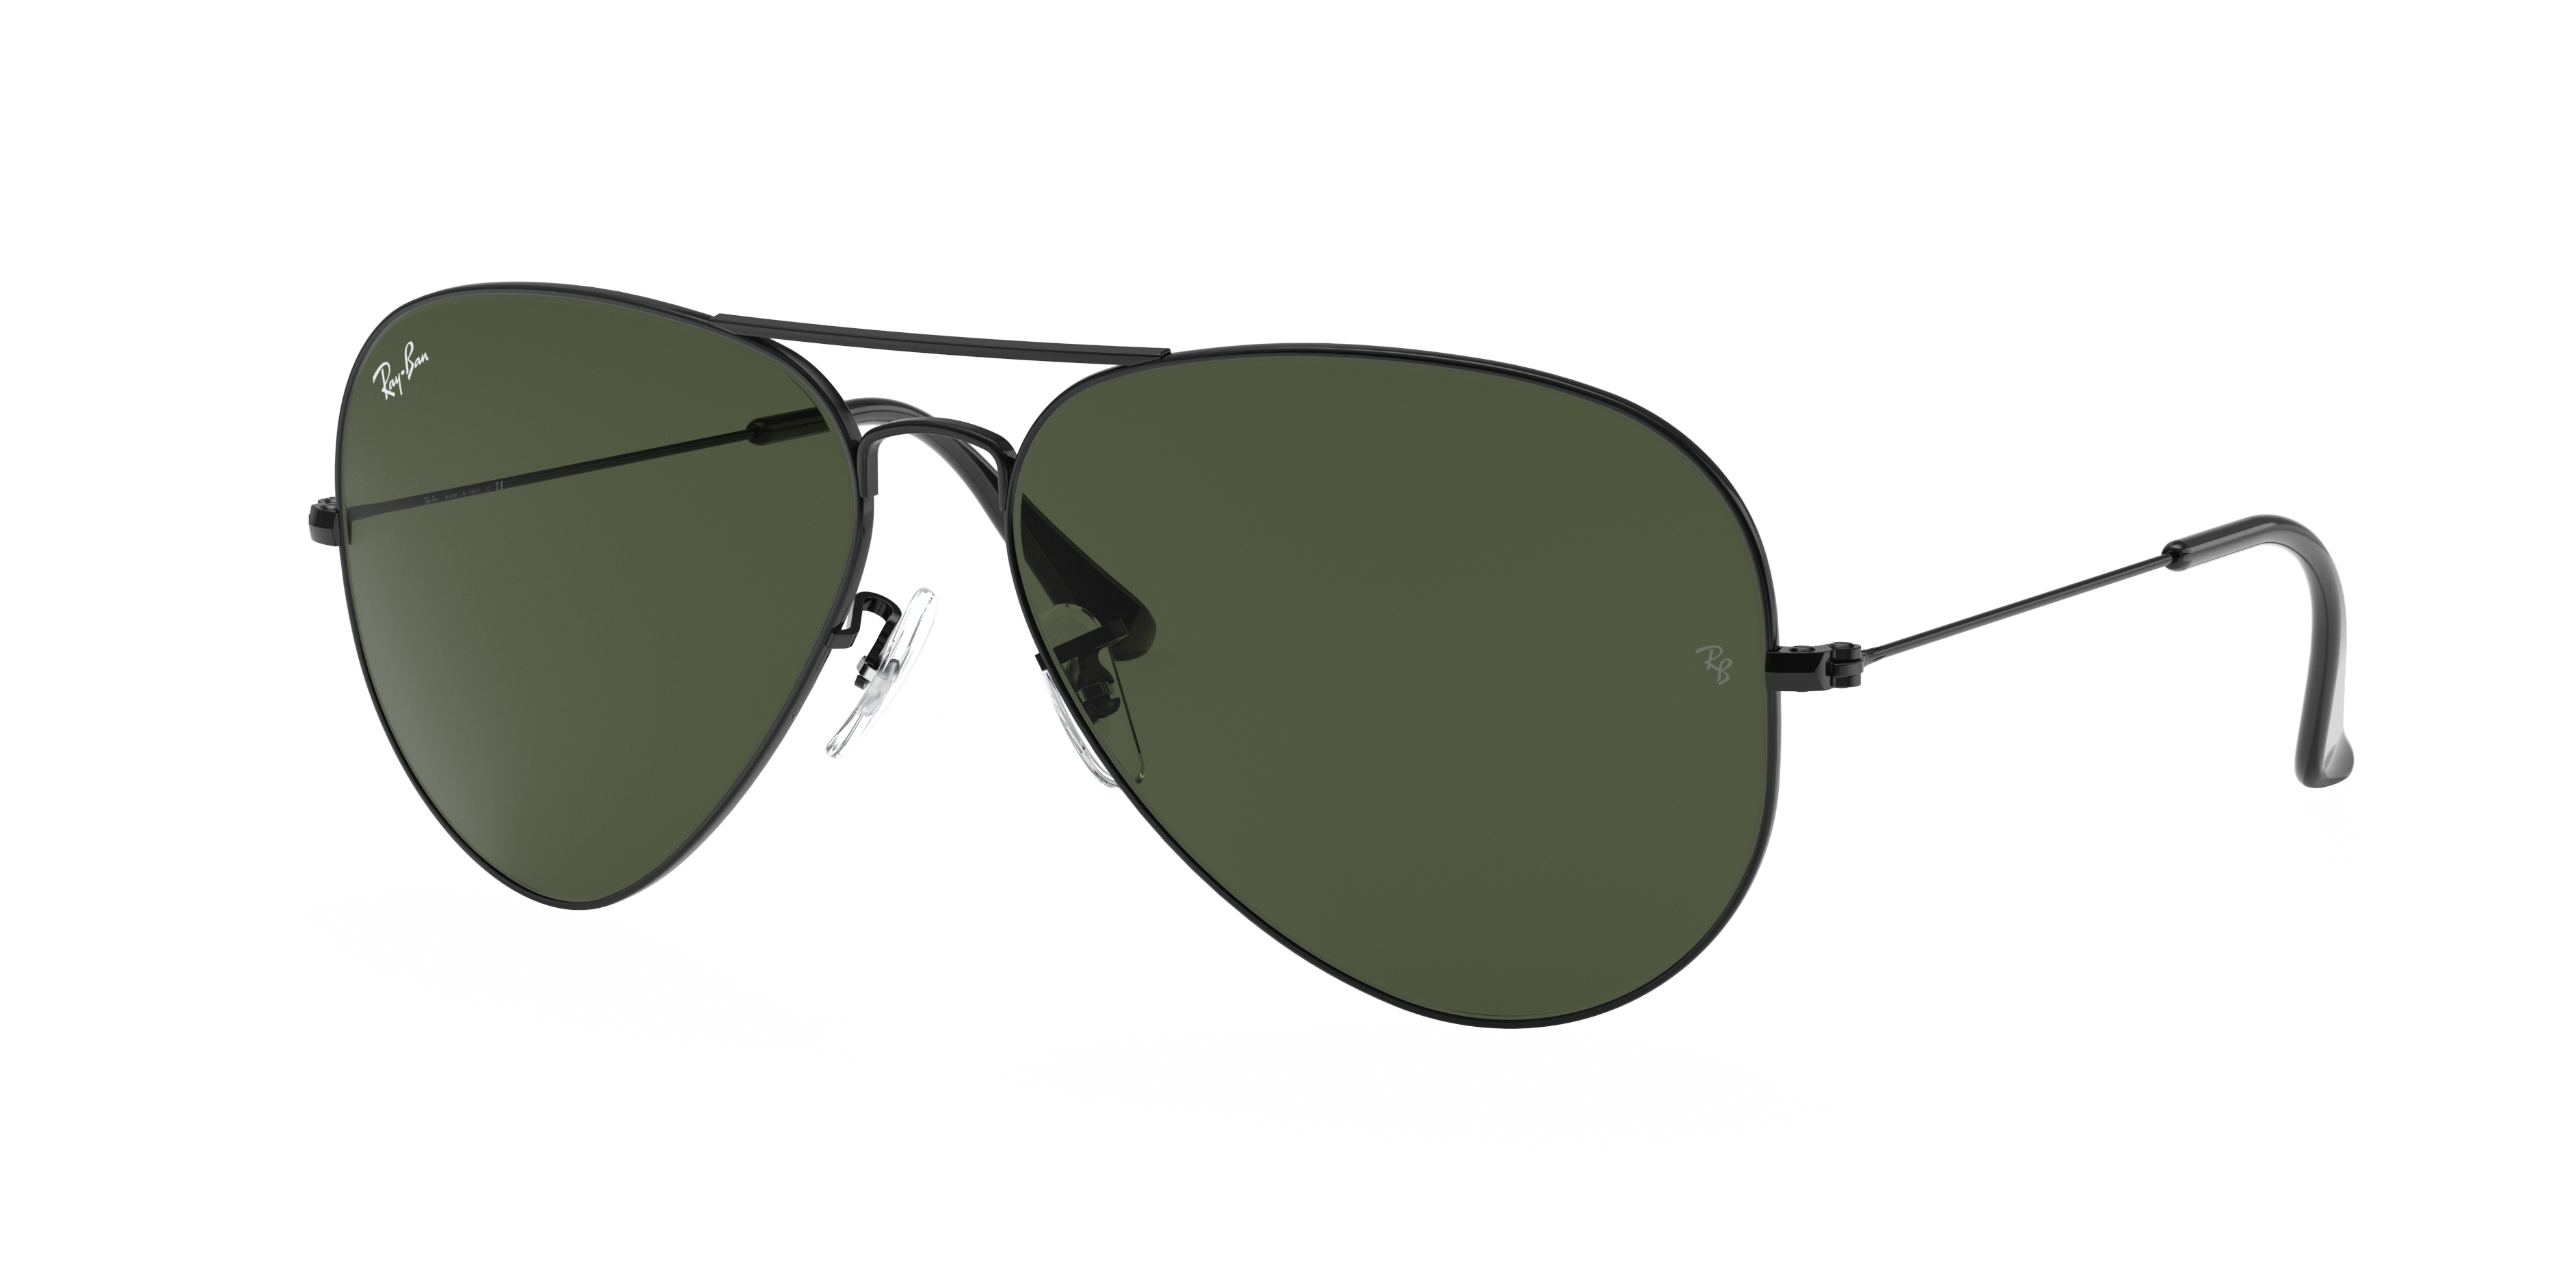 ray ban rb3026 62o14 138 price in india